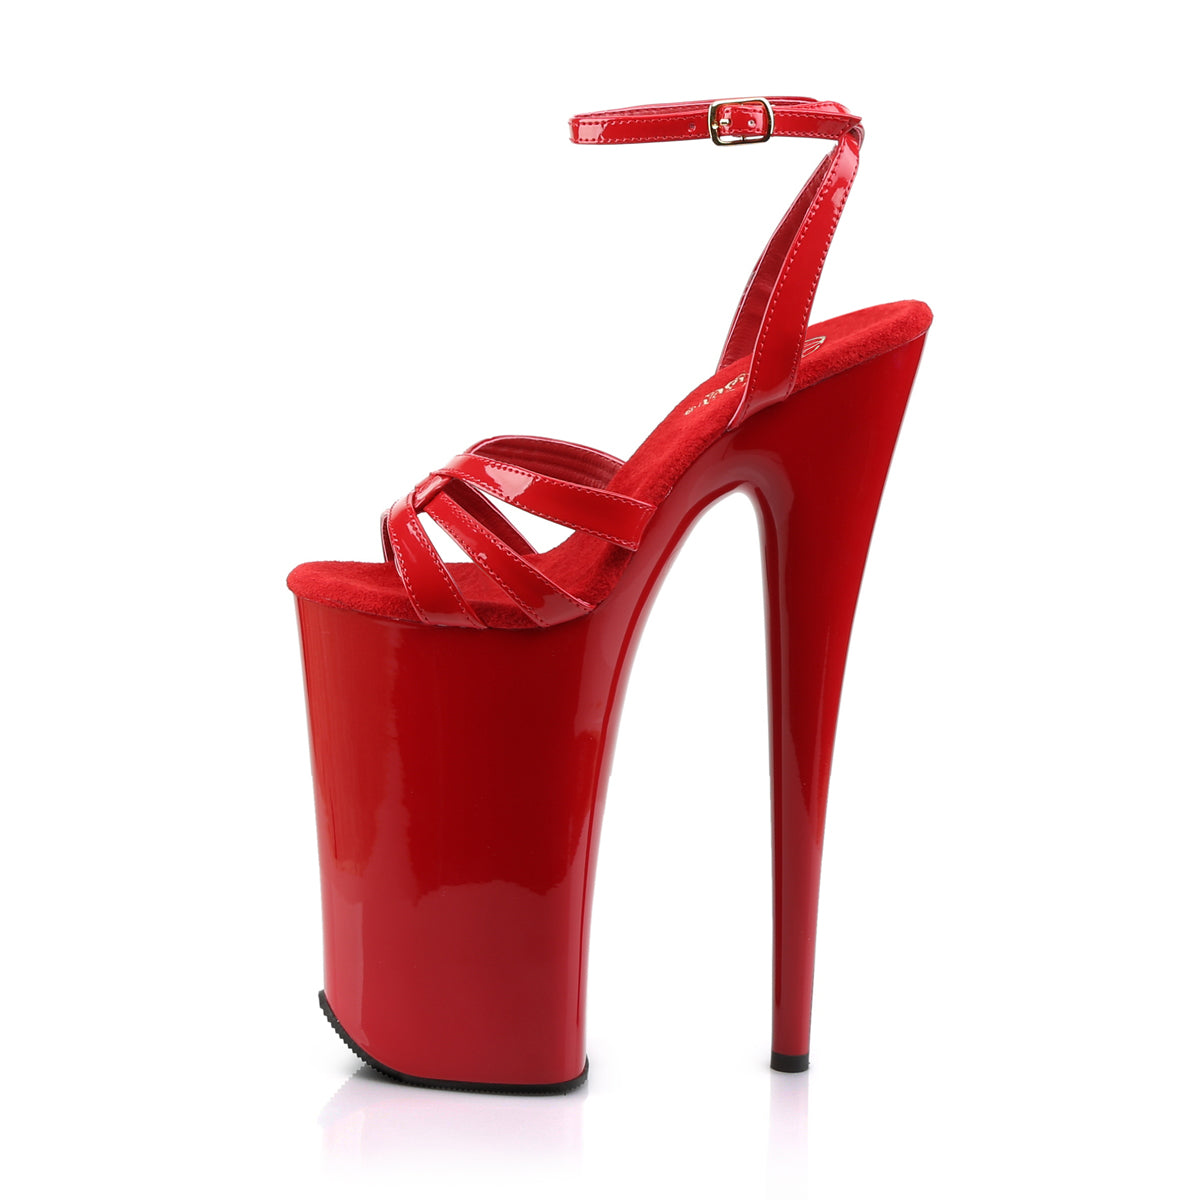 BEYOND-012 Pleasers Sexy 10" Heel Red Pole Dancing Platforms-Pleaser- Sexy Shoes Pole Dance Heels